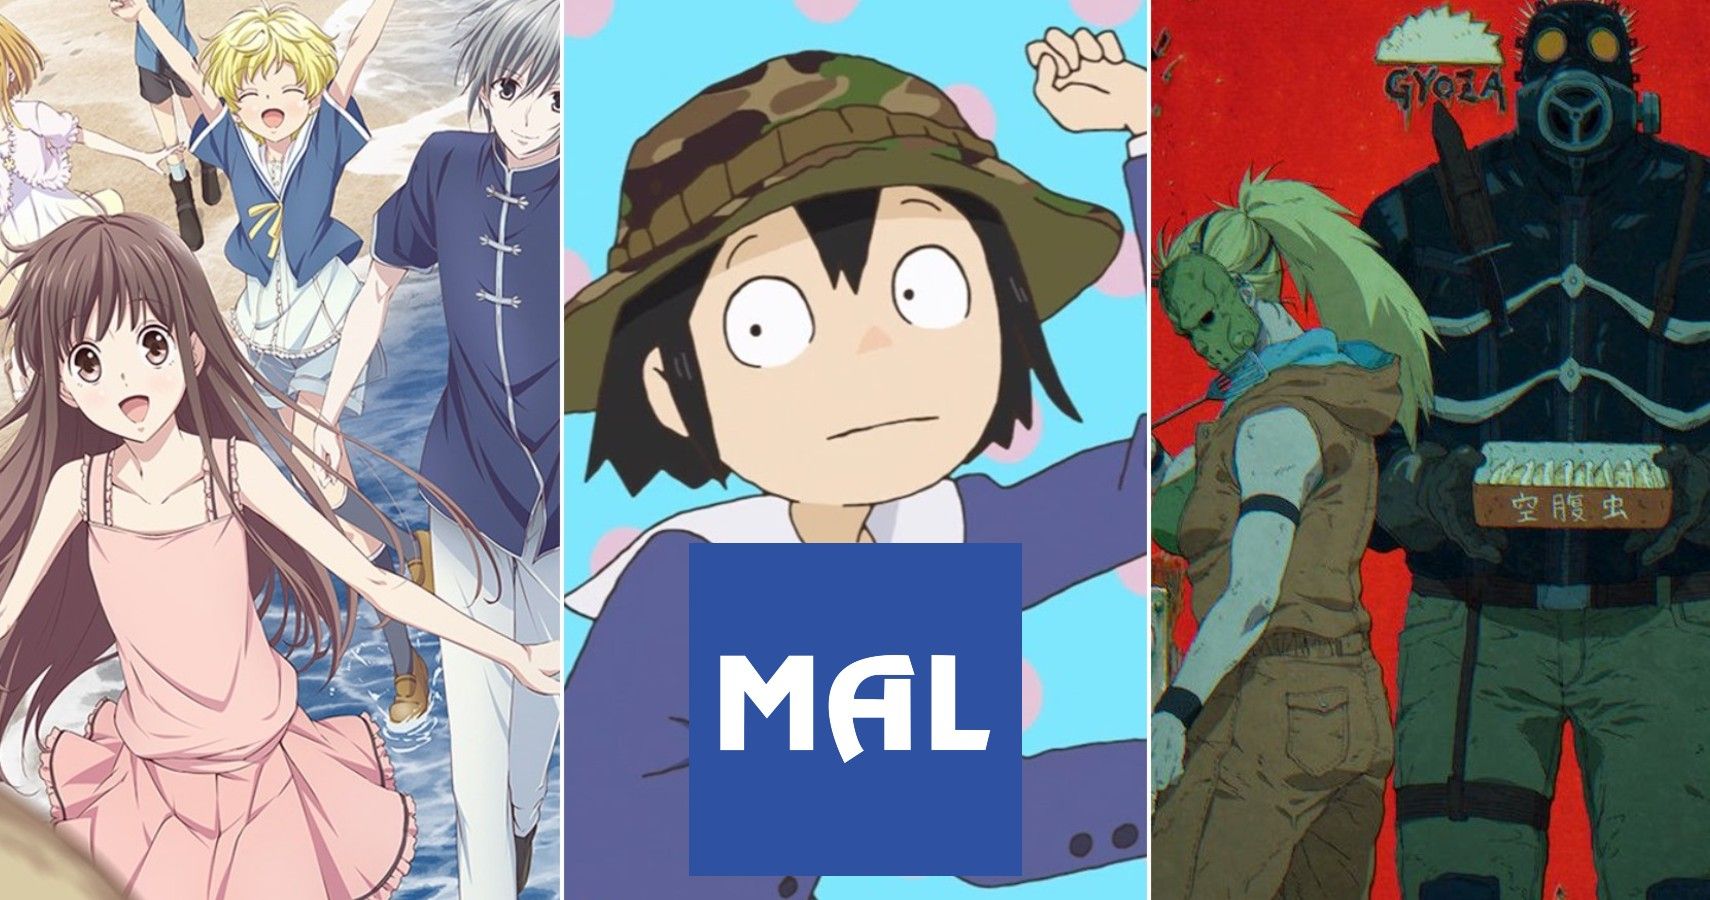 Yata's 2020 Anime Year in Review / Top 10